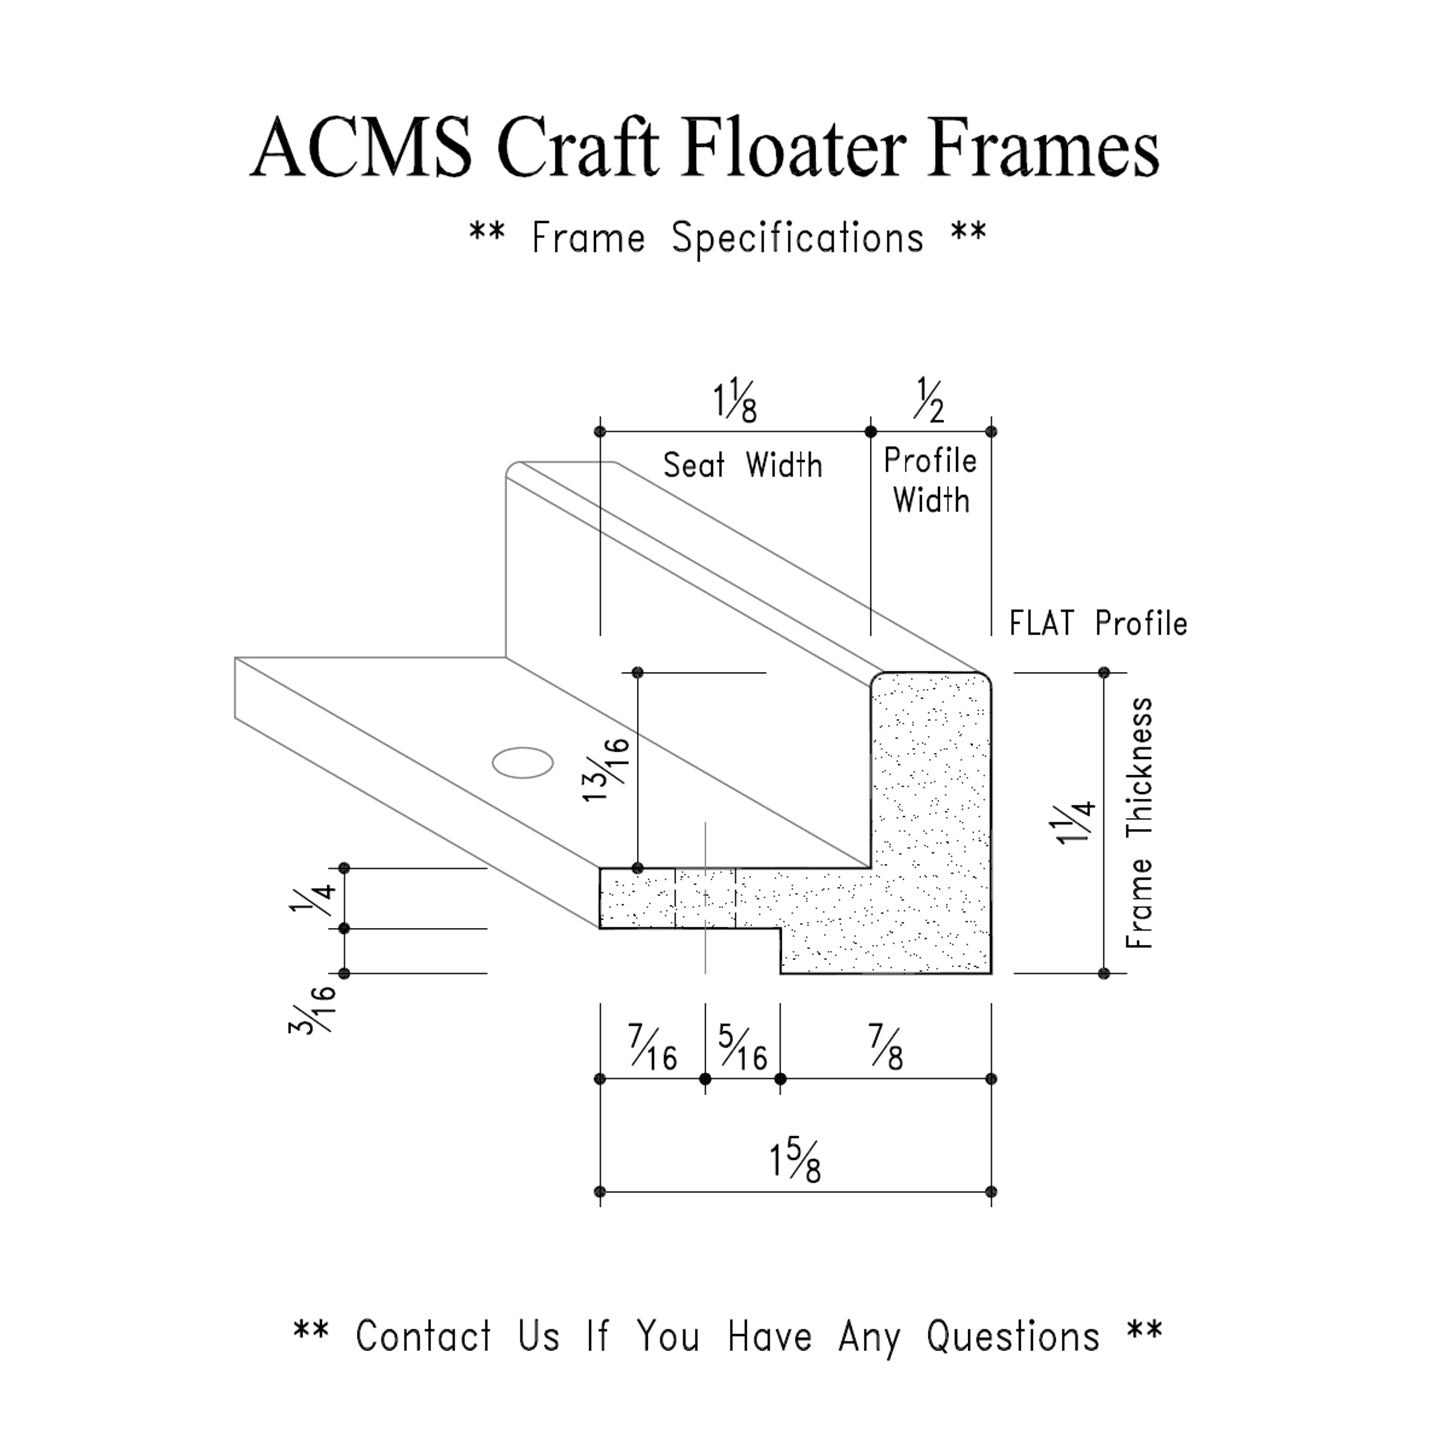 ACMS Round Craft Floater Frame - For 3/4" Thick Artwork - Profile 1/2" FLAT - 1 1/4" Thick Frame